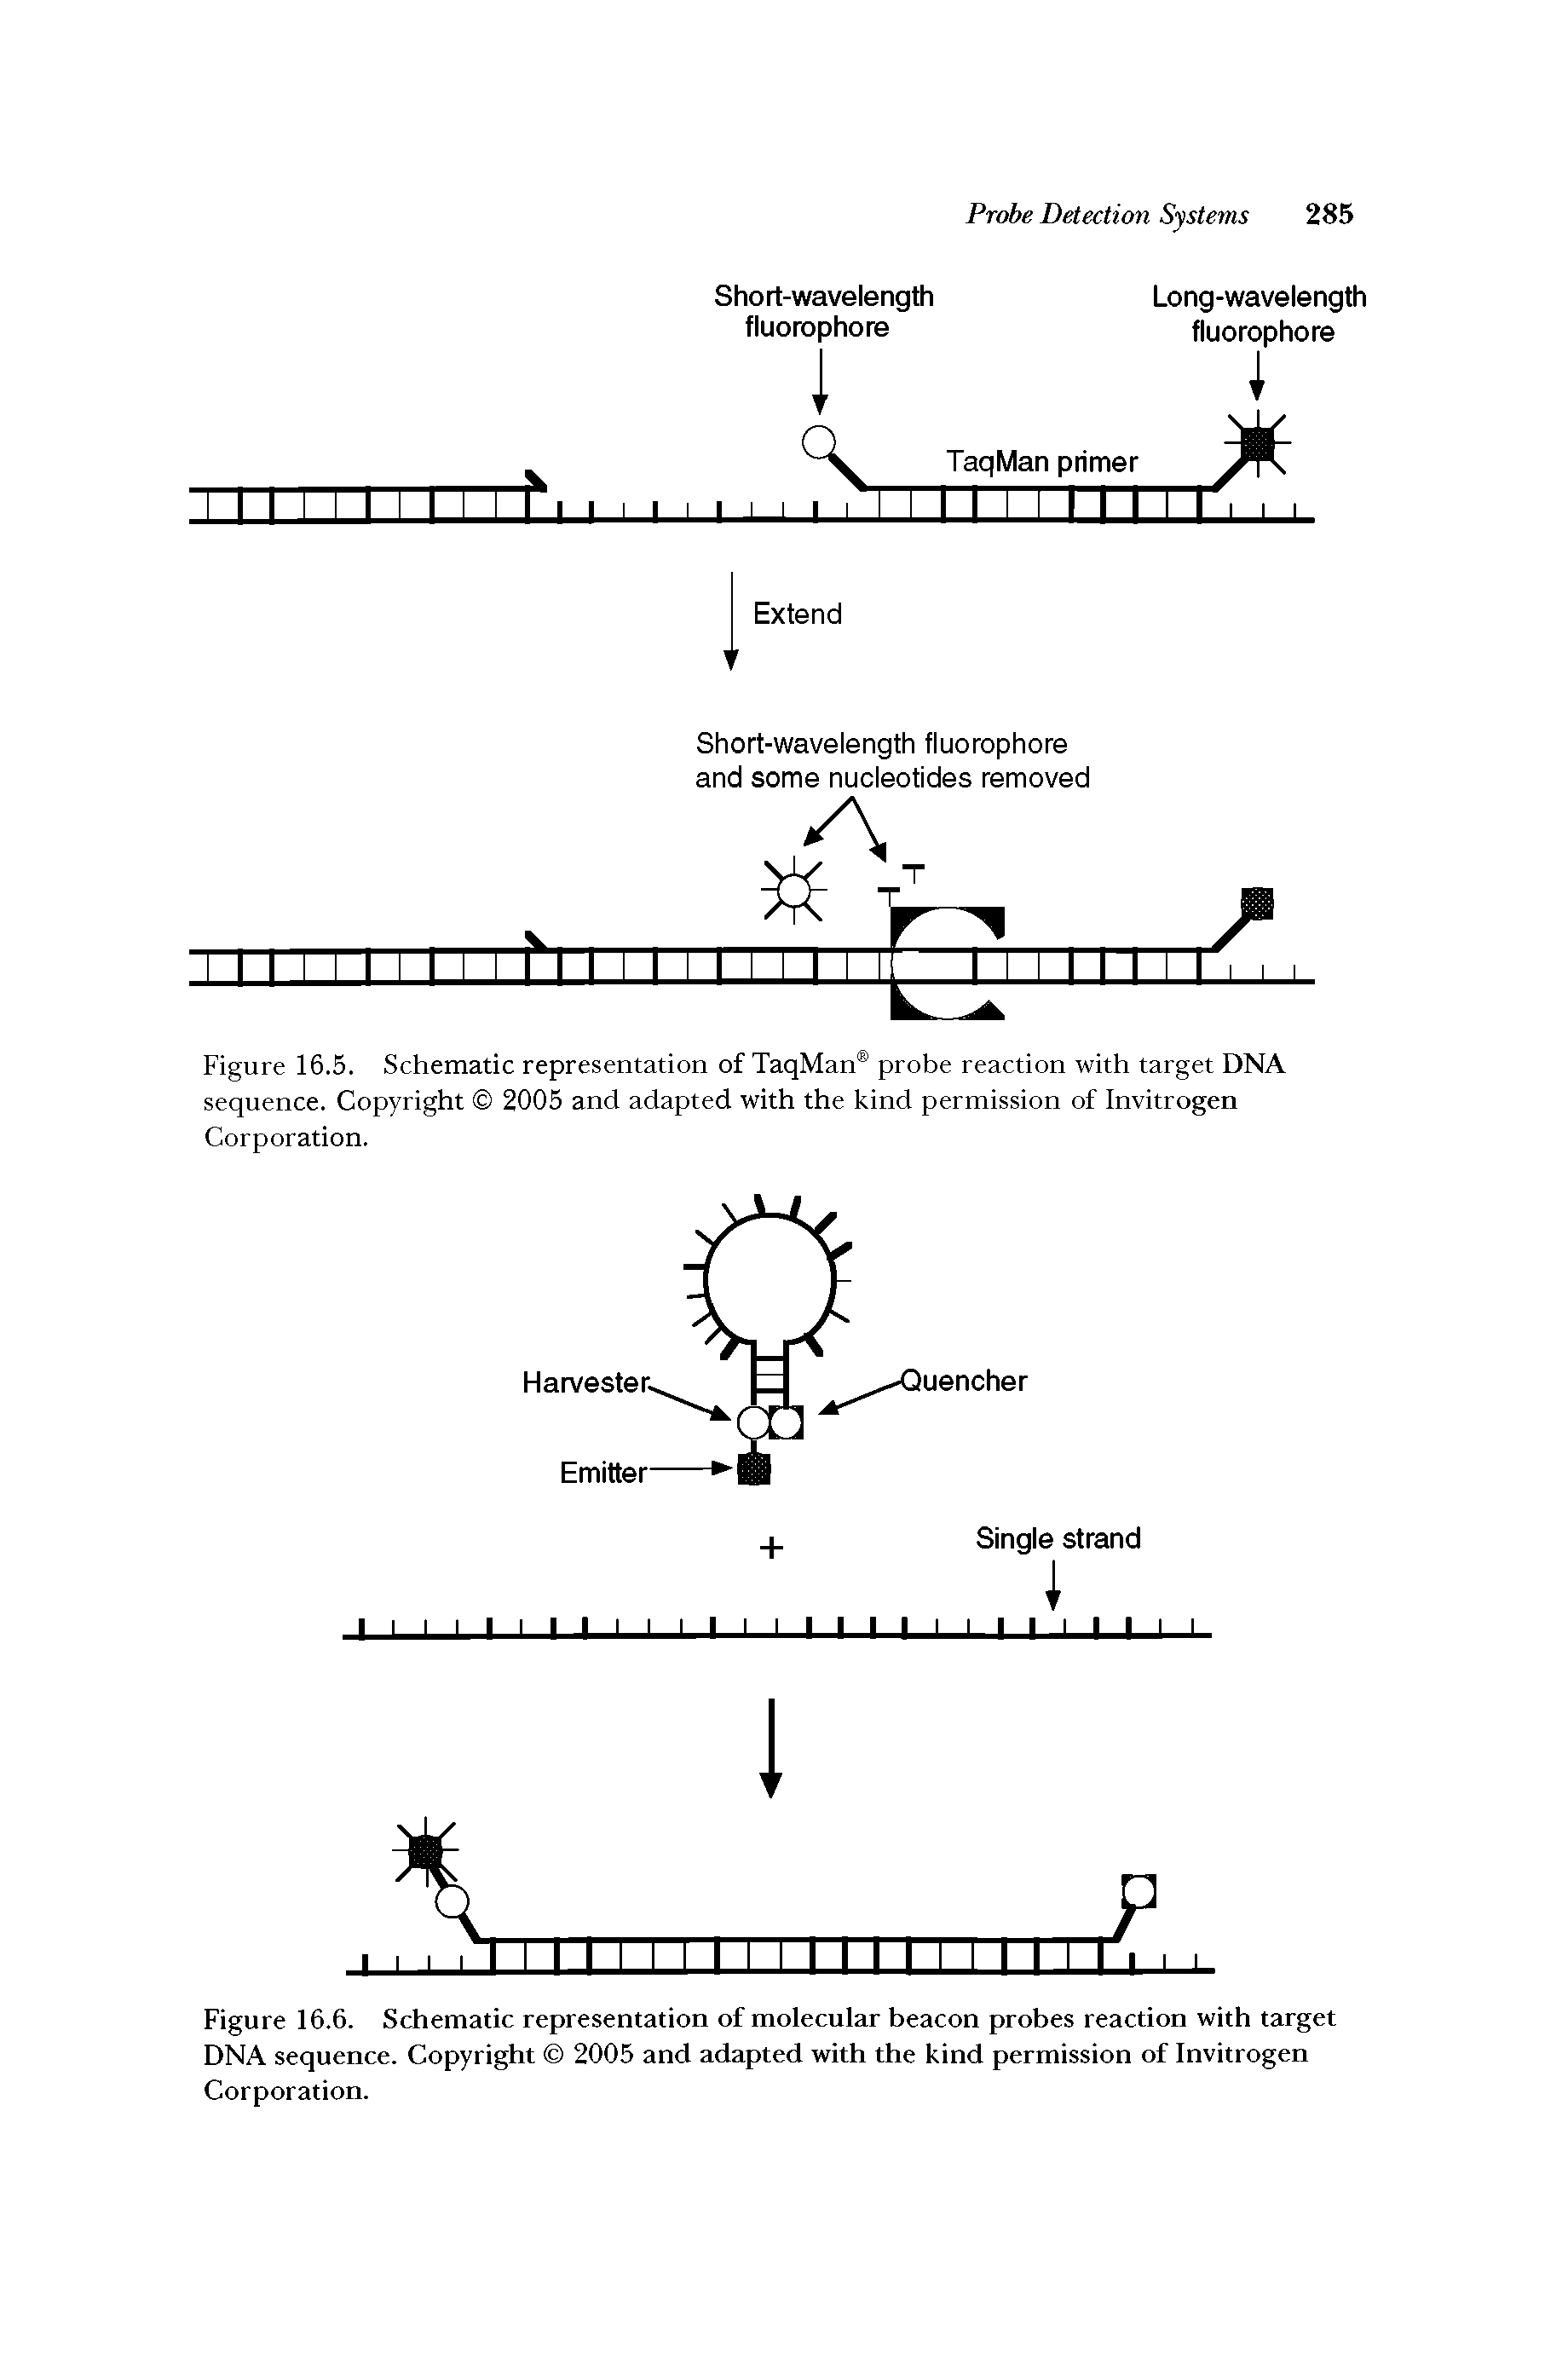 Figure 16.6. Schematic representation of molecular beacon probes reaction with target DNA sequence. Copyright 2005 and adapted with the kind permission of Invitrogen Corporation.